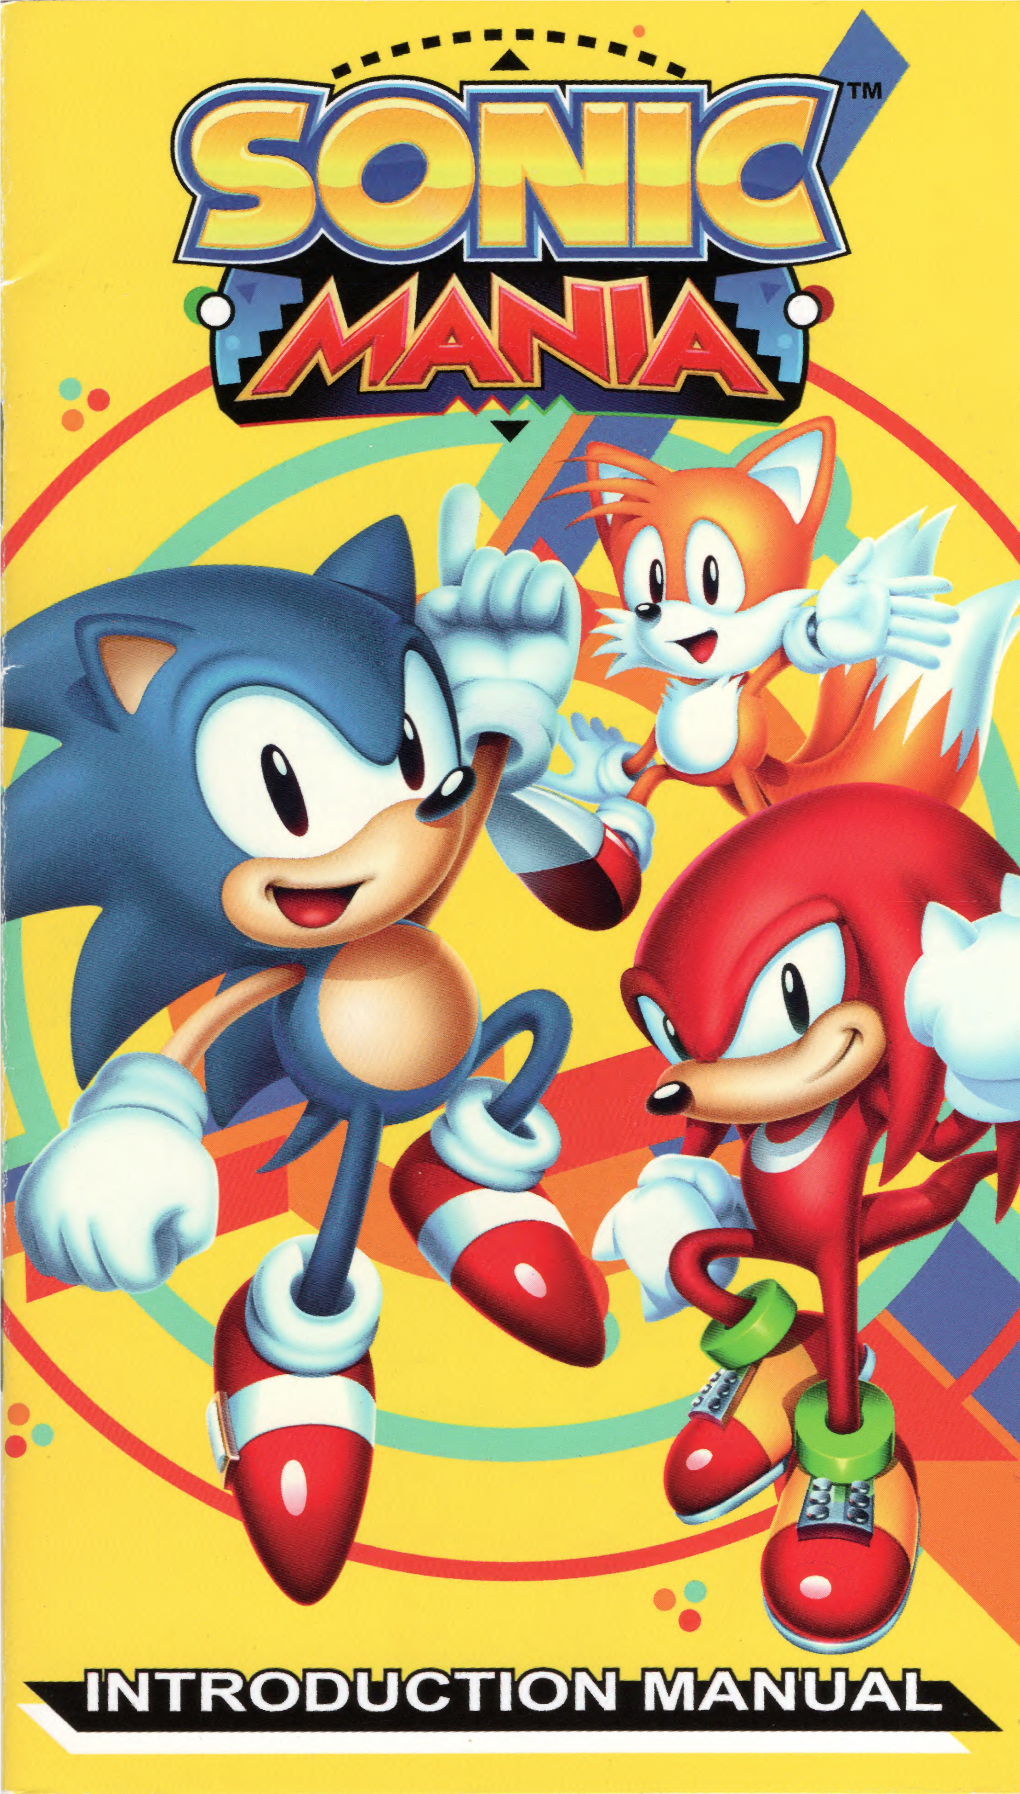 Sonic Mania Introduction Manual (Seperate Paged Version)